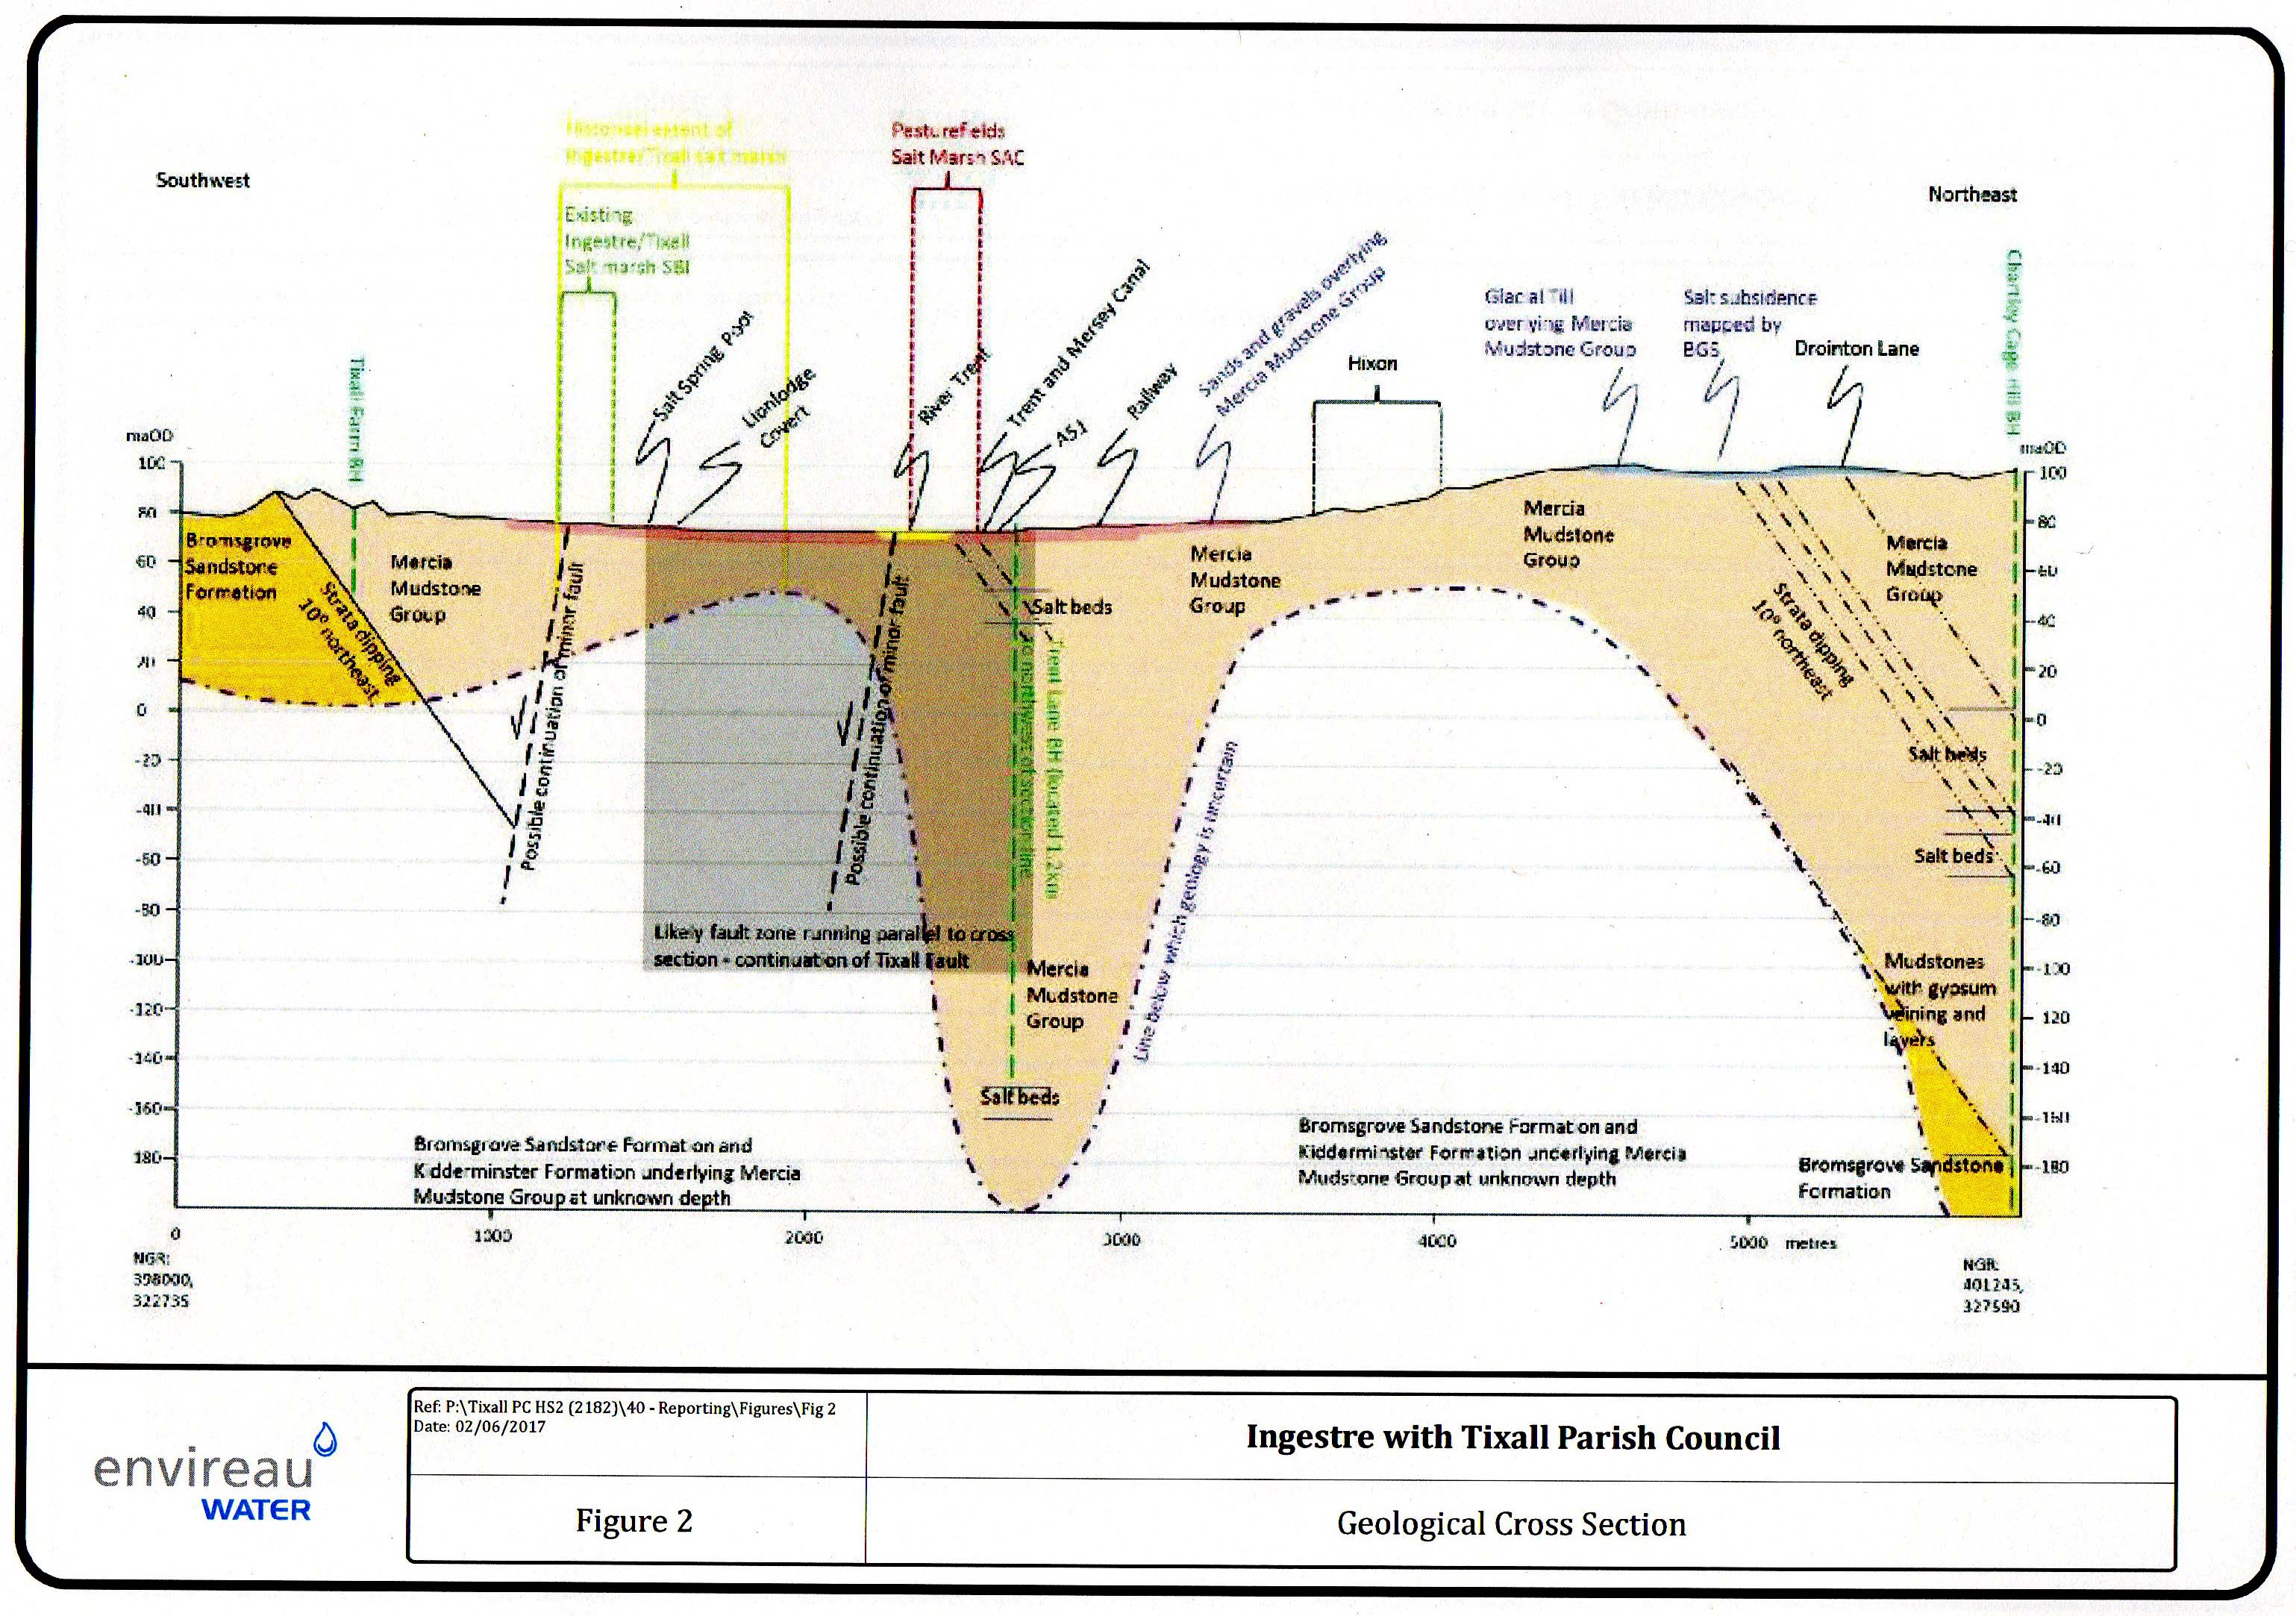 Geological cross section of
                the area